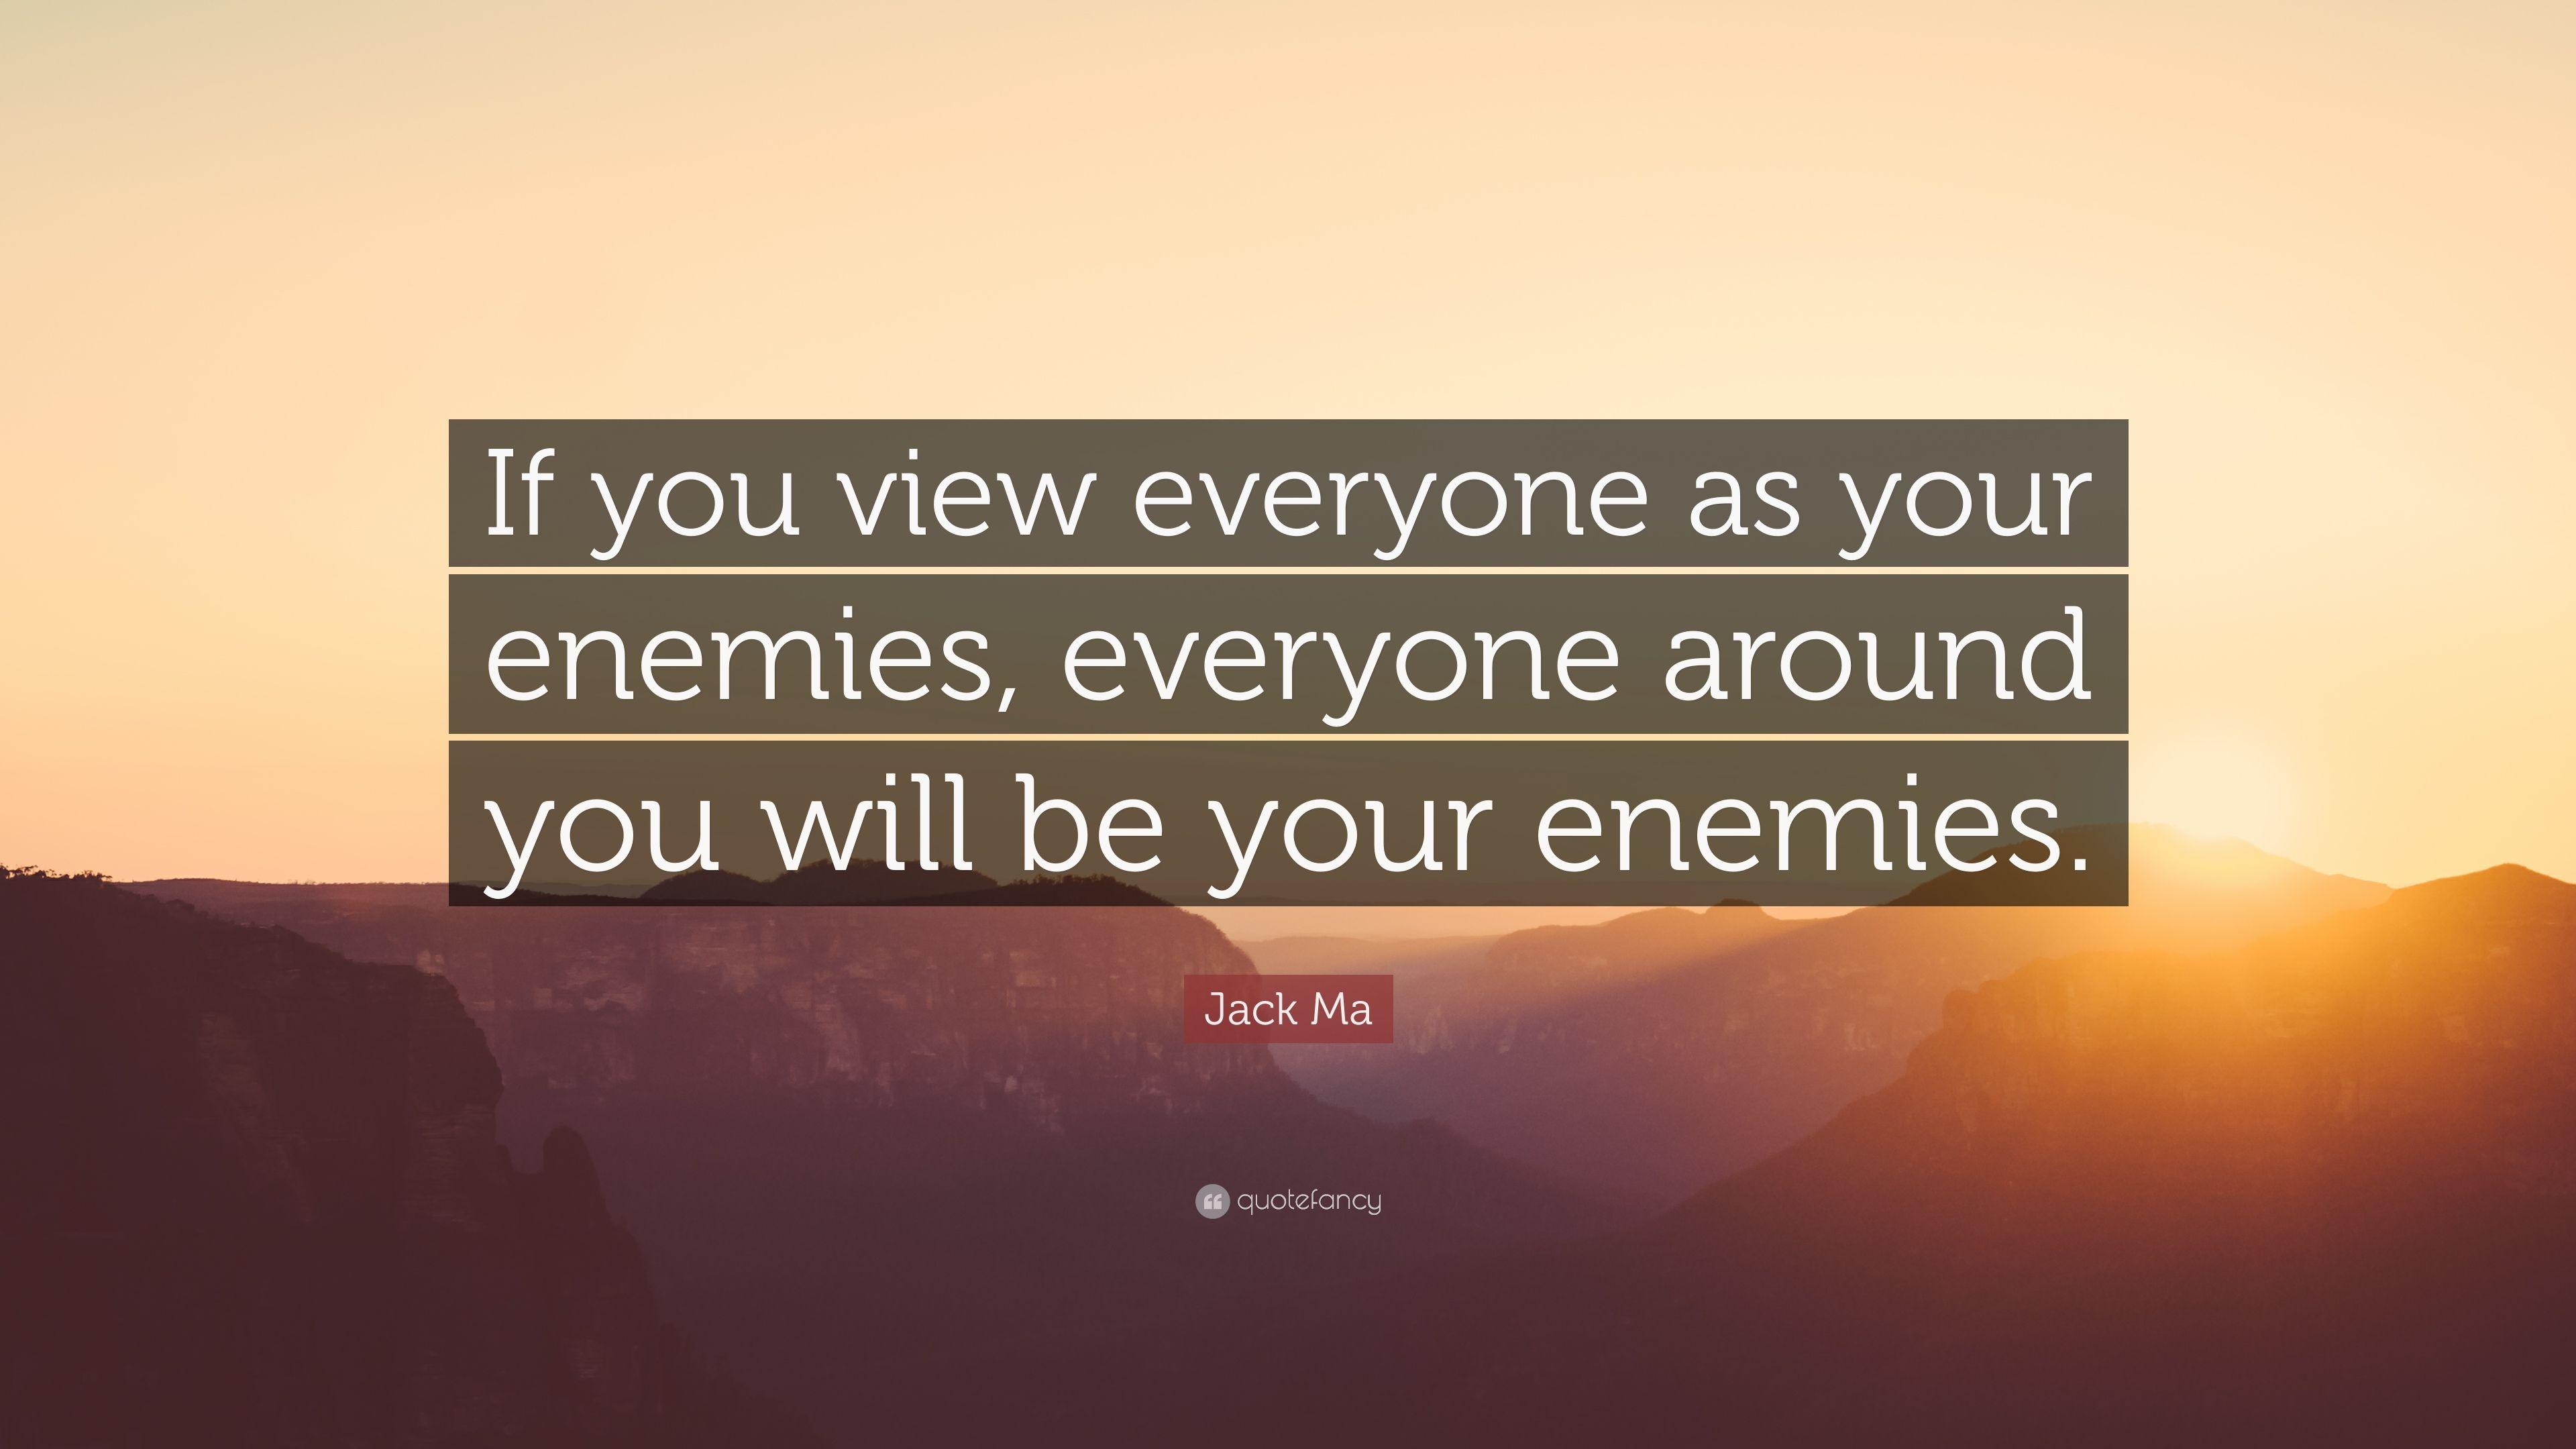 Jack Ma Quote: “If you view everyone as your enemies, everyone